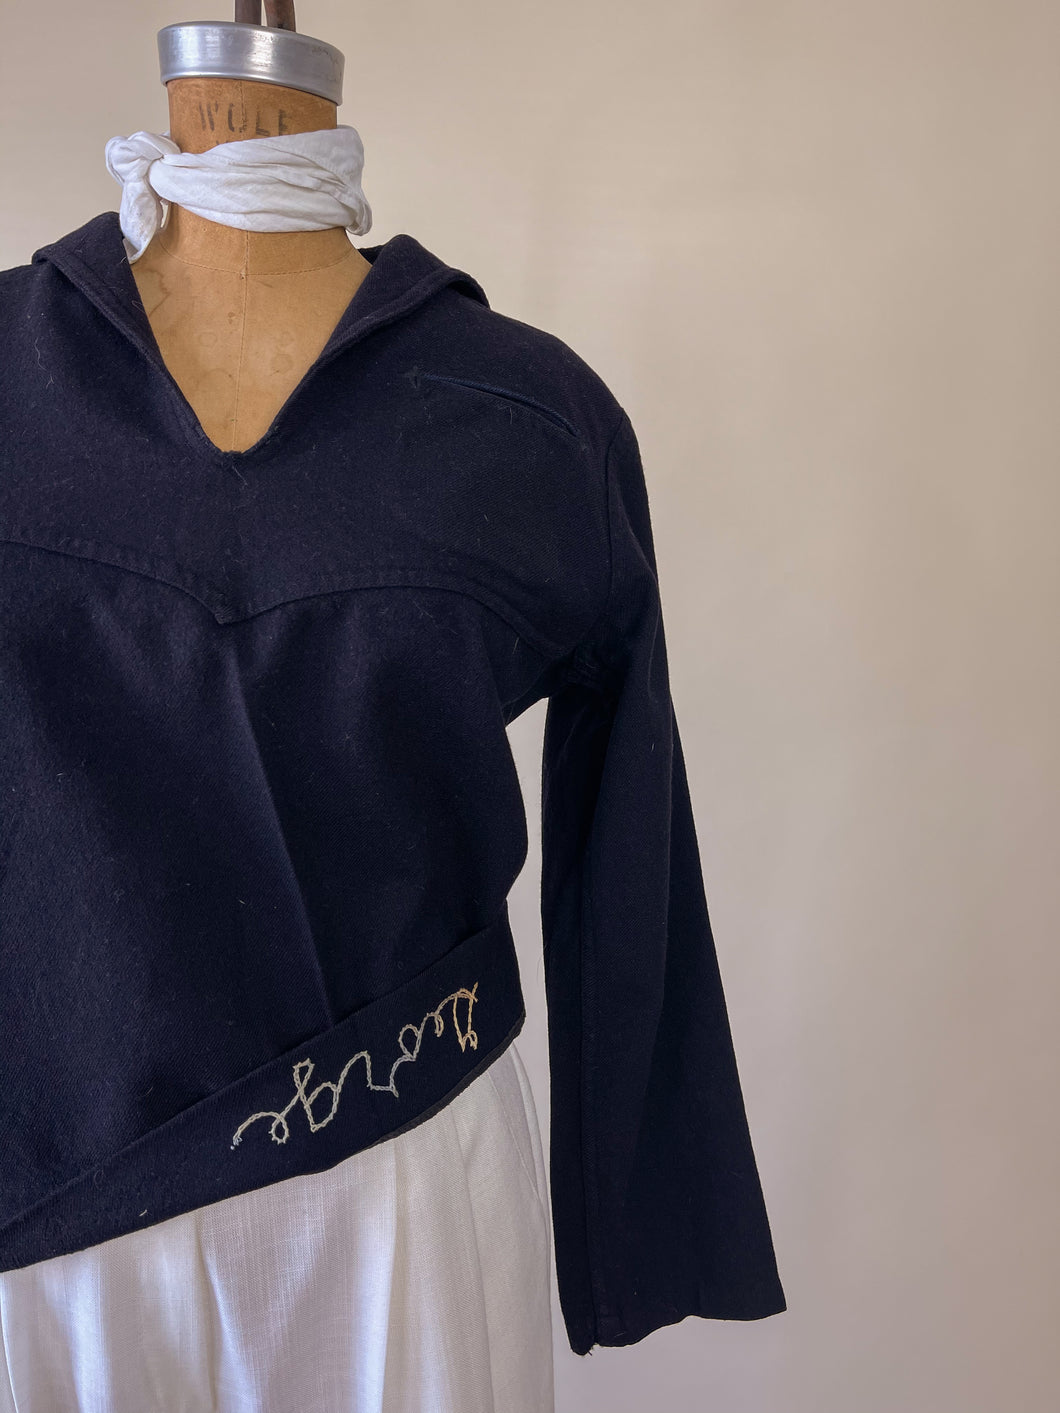 WWII Naval Clothing Factory Chainstitch Sailor Jumper | XS